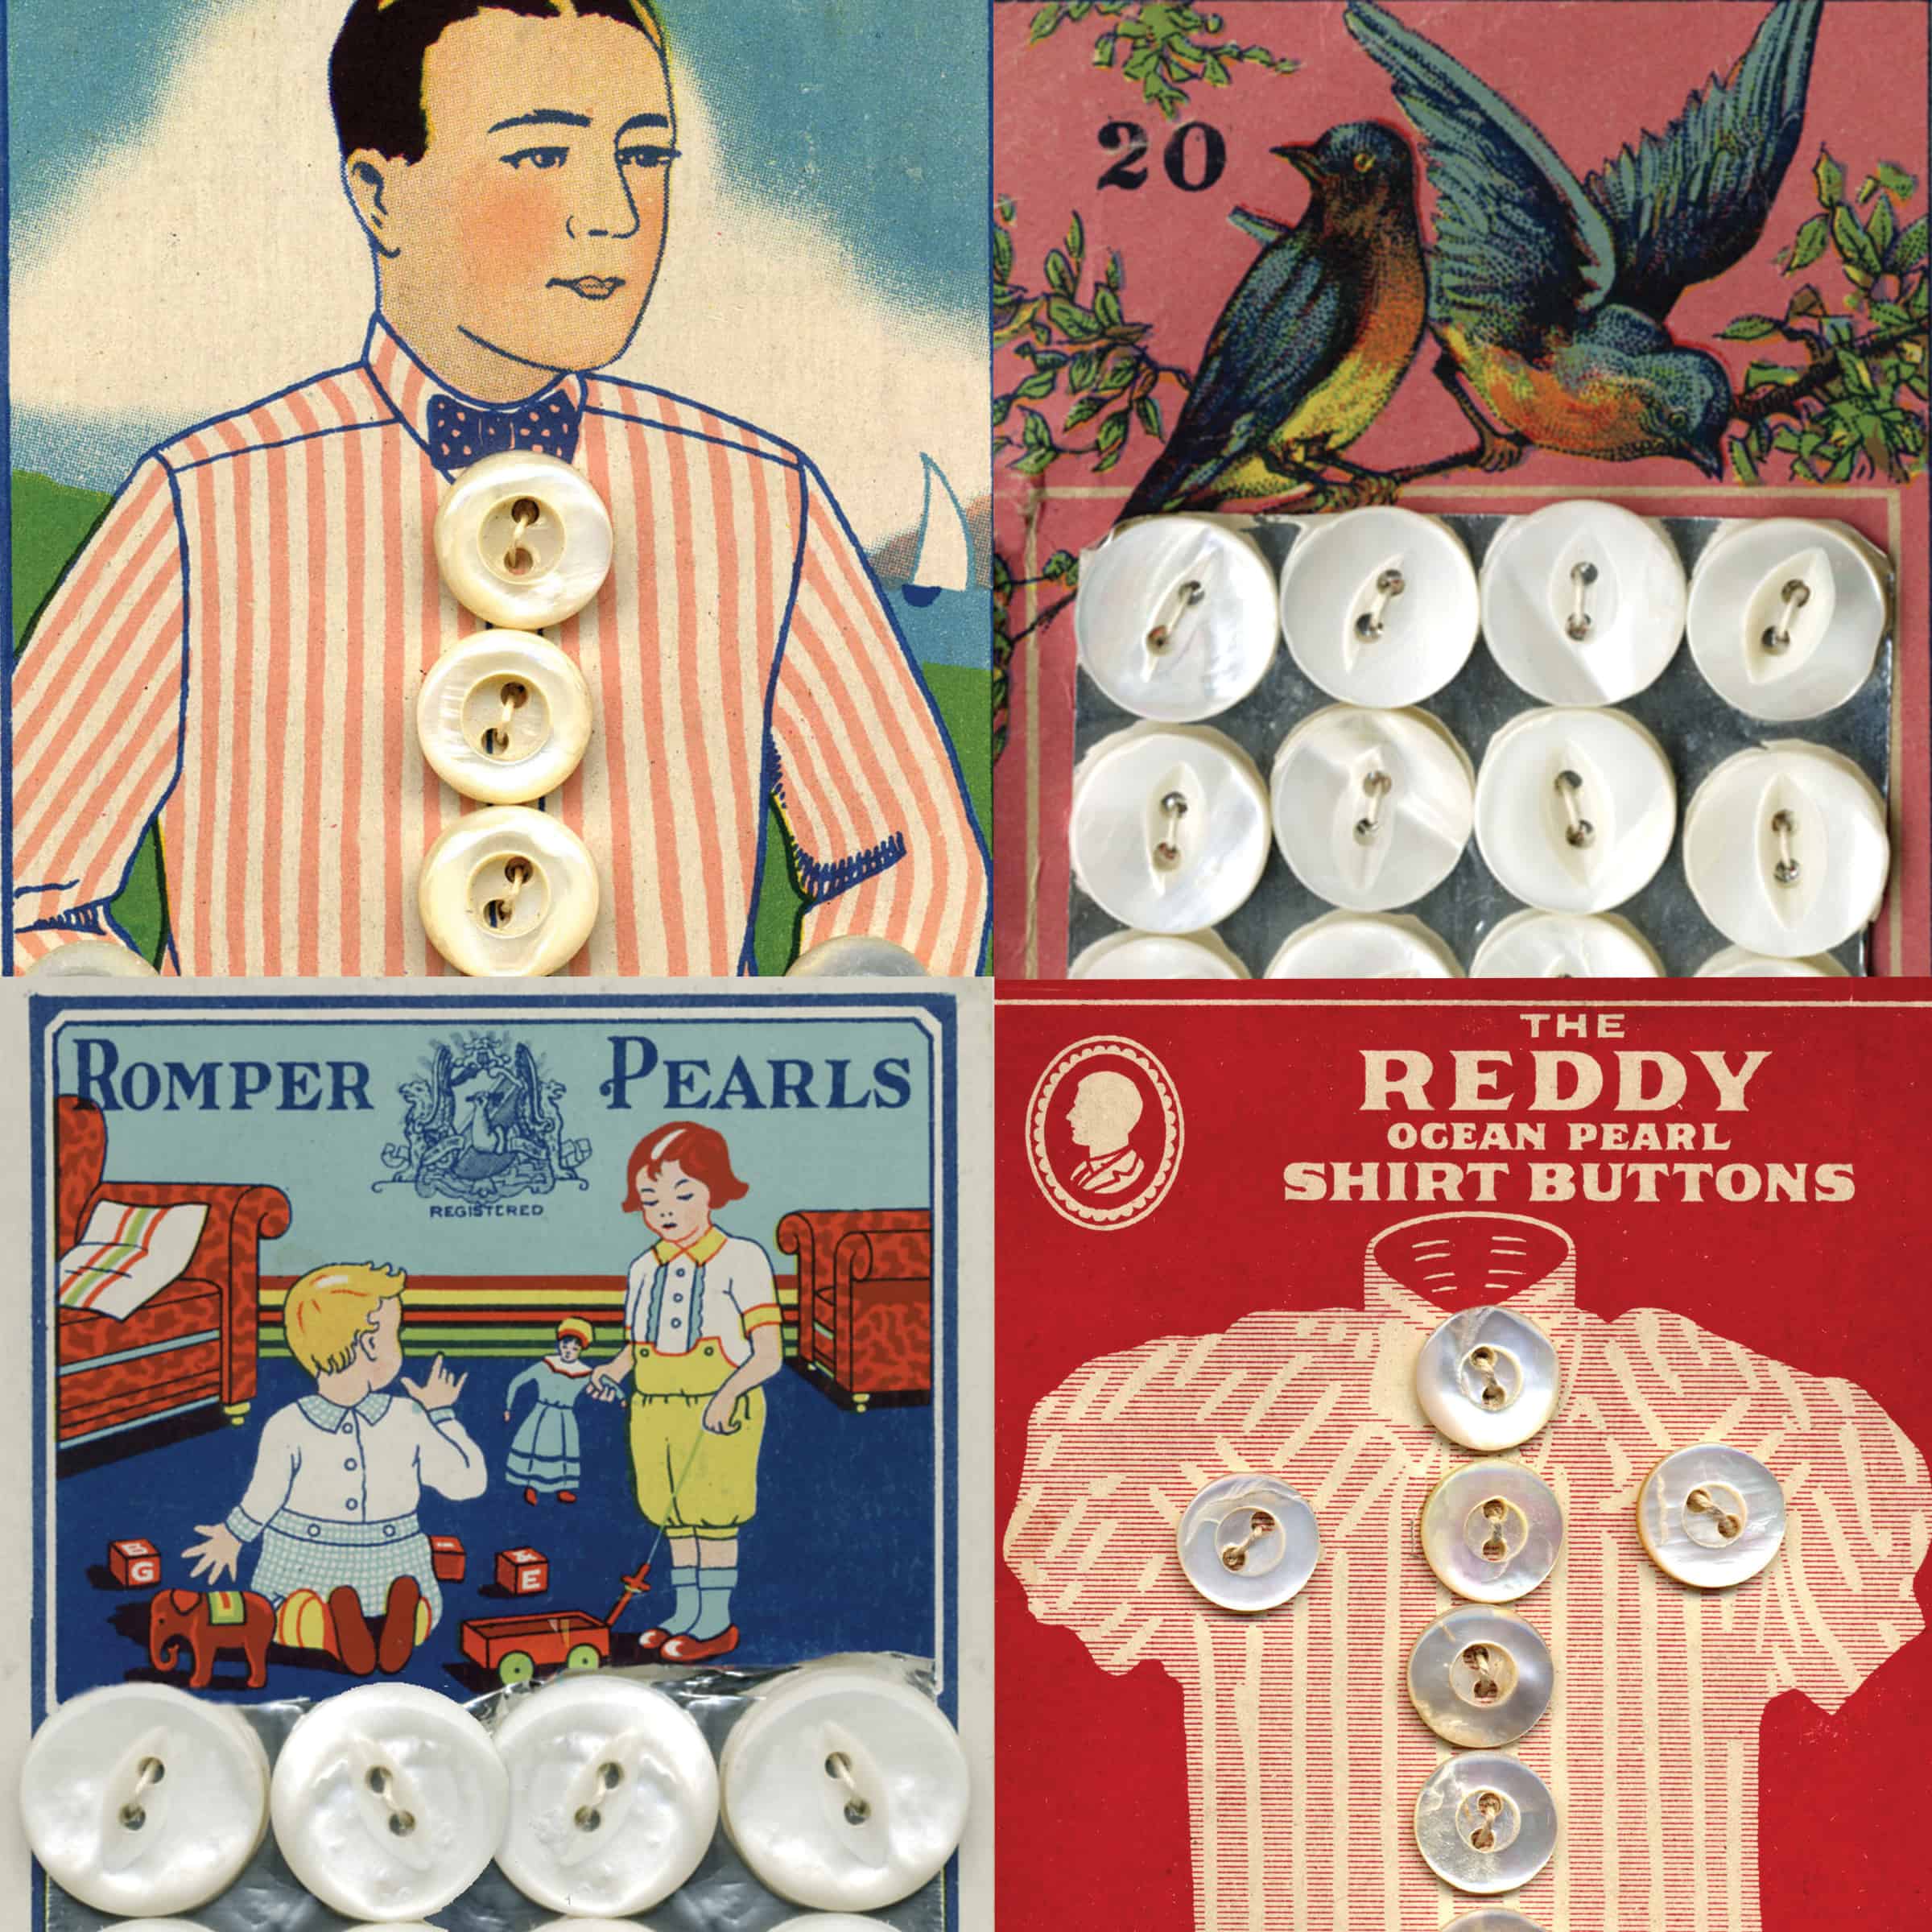 Pearly Shirt Buttons